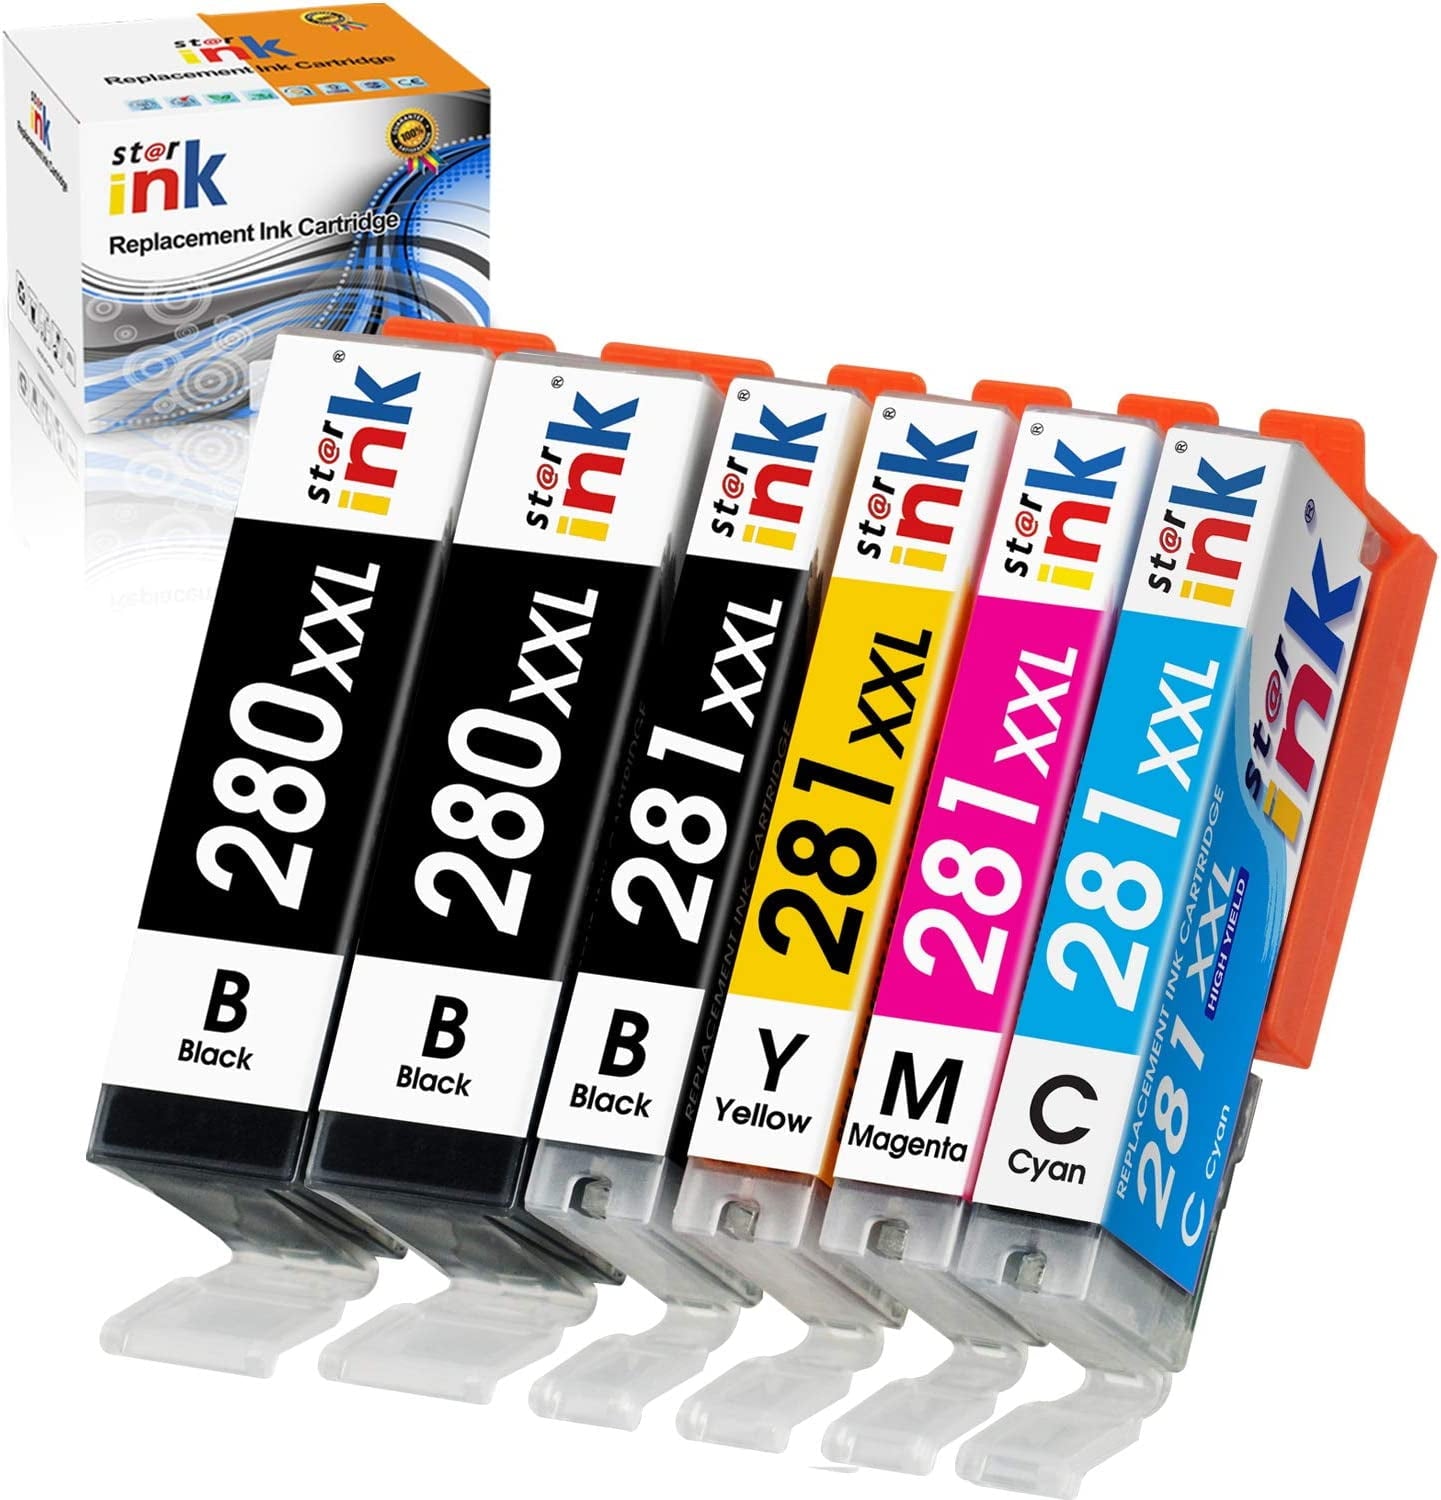 280XXL 281XXL Ink Cartridges for Canon Ink 280 and 281 XXL PGI-280XXL CLI-281XXL for Pixma TR7520 TR8520 TS6120 TS6220 TS8120 TS8220 TS9120 (2 PG Black 1 Black 1 Cyan 1 Magenta 1 Yellow, 6 Pack)